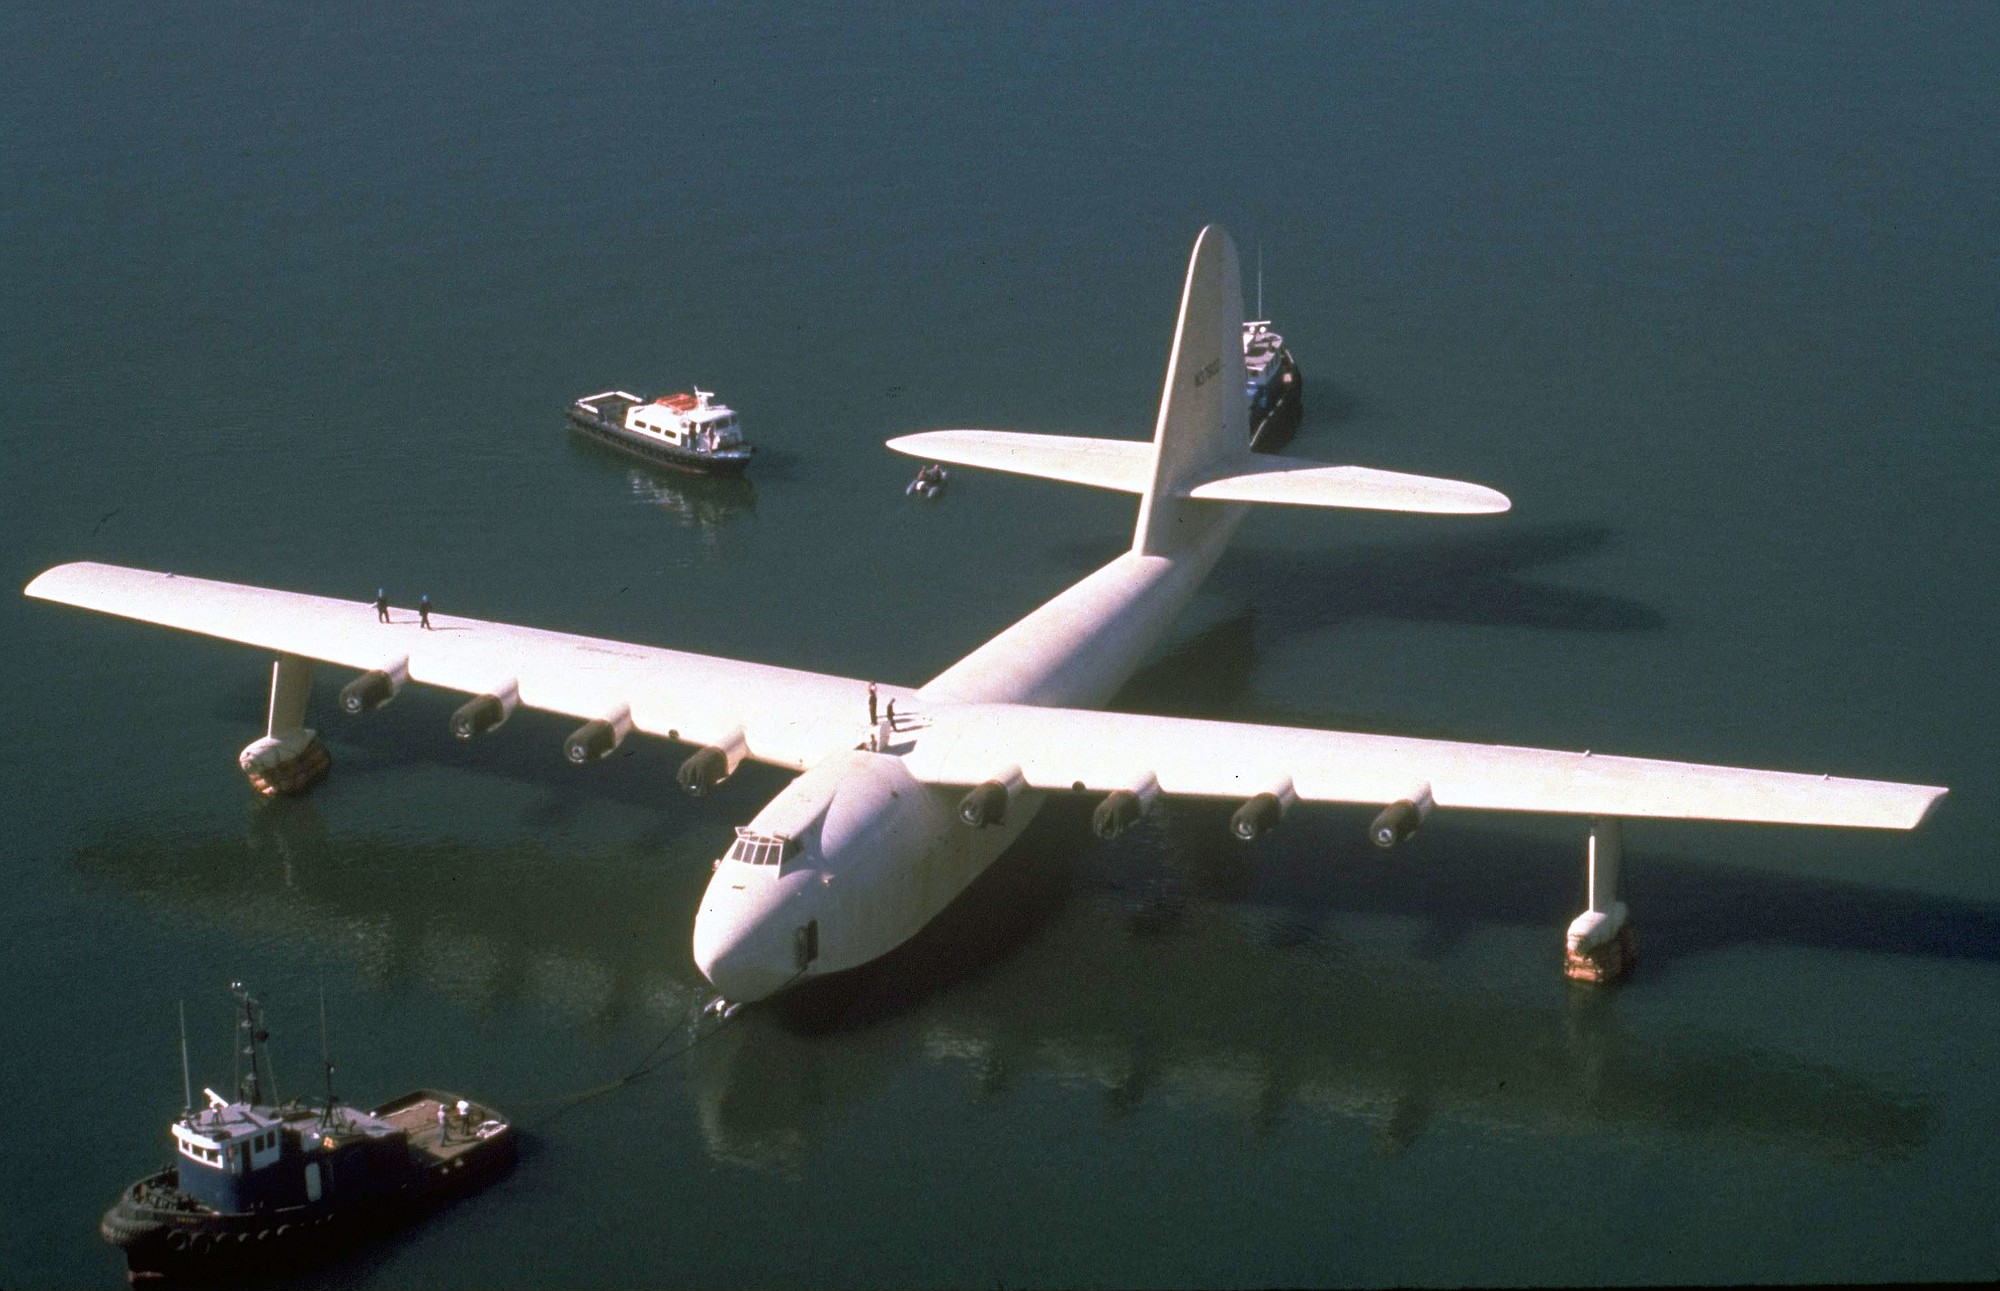 FILE - In this Oct. 29, 1980 file photo, Howard Hughes' wooden flying boat the &quot;Spruce Goose,&quot; is towed by a tugboat from its hangar in Long Beach, Calif. The gigantic historic wooden airplane whose fate was mired in a financial dispute, will permanently stay in Oregon. The Evergreen Aviation and Space Museum has reached an agreement with the Aero Club of Southern California to take full ownership of the plane in the coming weeks, said California attorney Robert E. Lyon, who represents the Aero Club. Lyon said the agreement was reached in early July 2015.